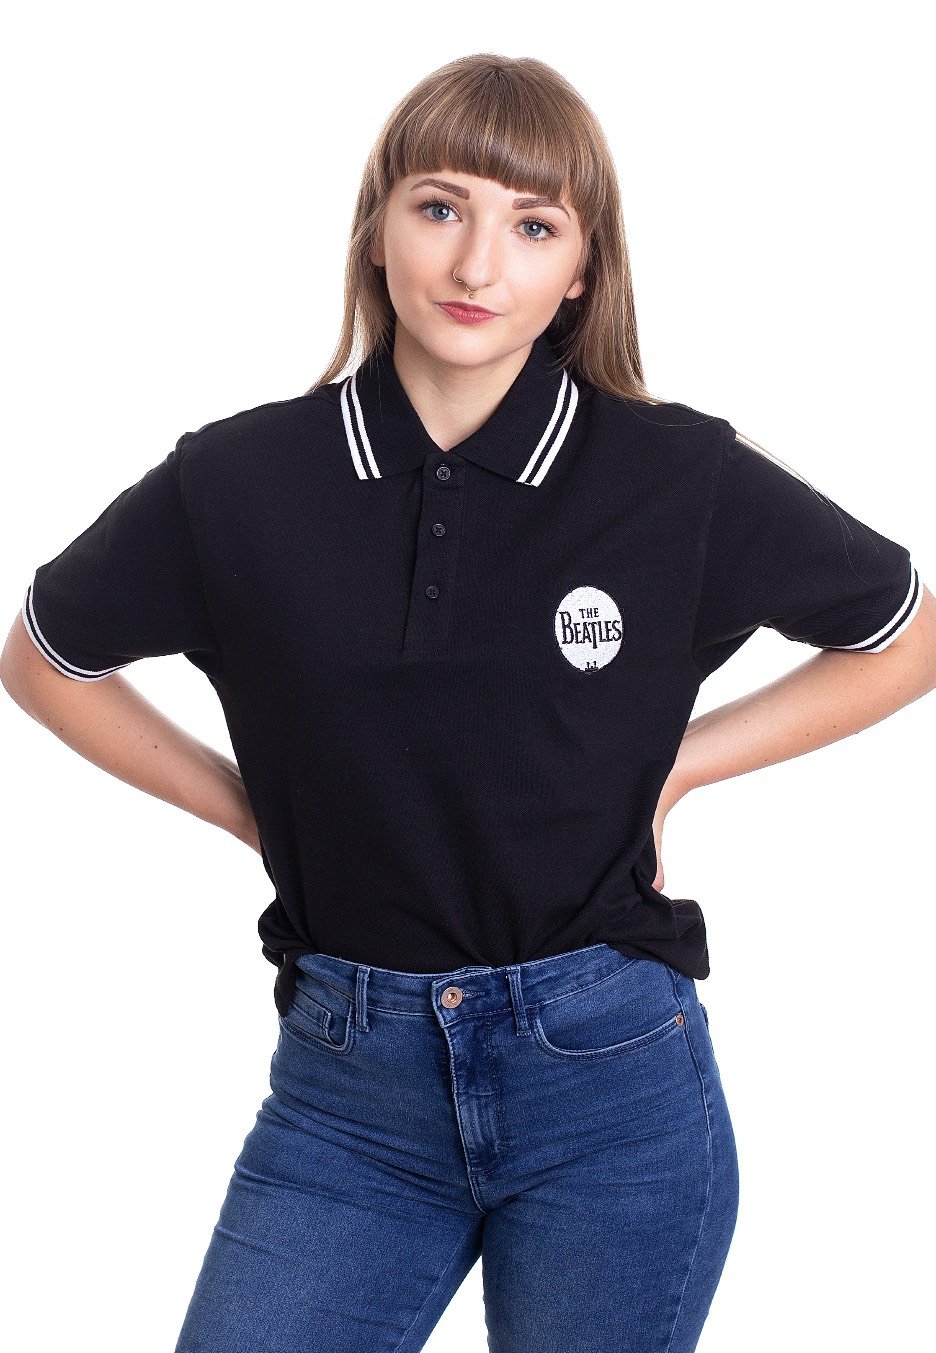 The Beatles Polo Shirt Embroidered Classic Drum Band Logo new Official Unisex